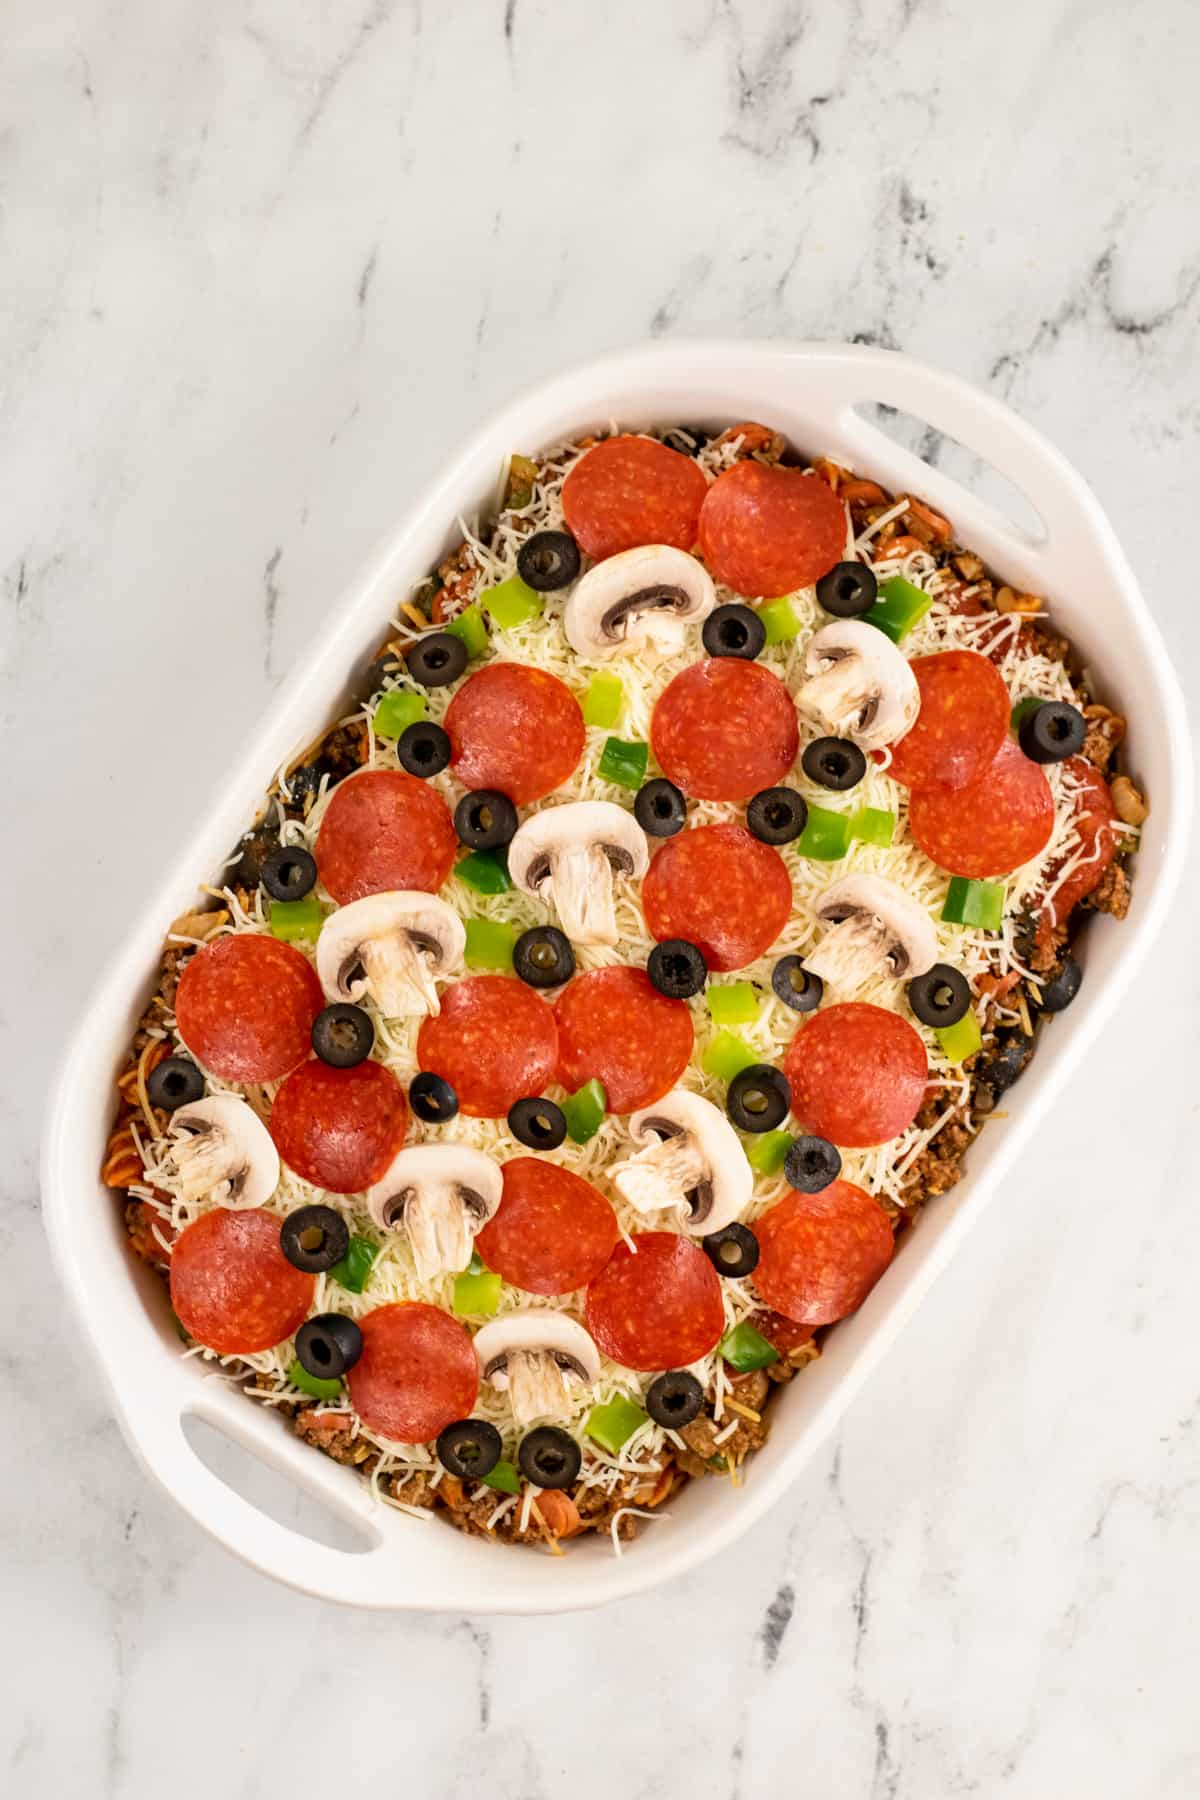 Casserole topped with large pepperoni, sliced mushrooms, chopped green peppers, and sliced black olives